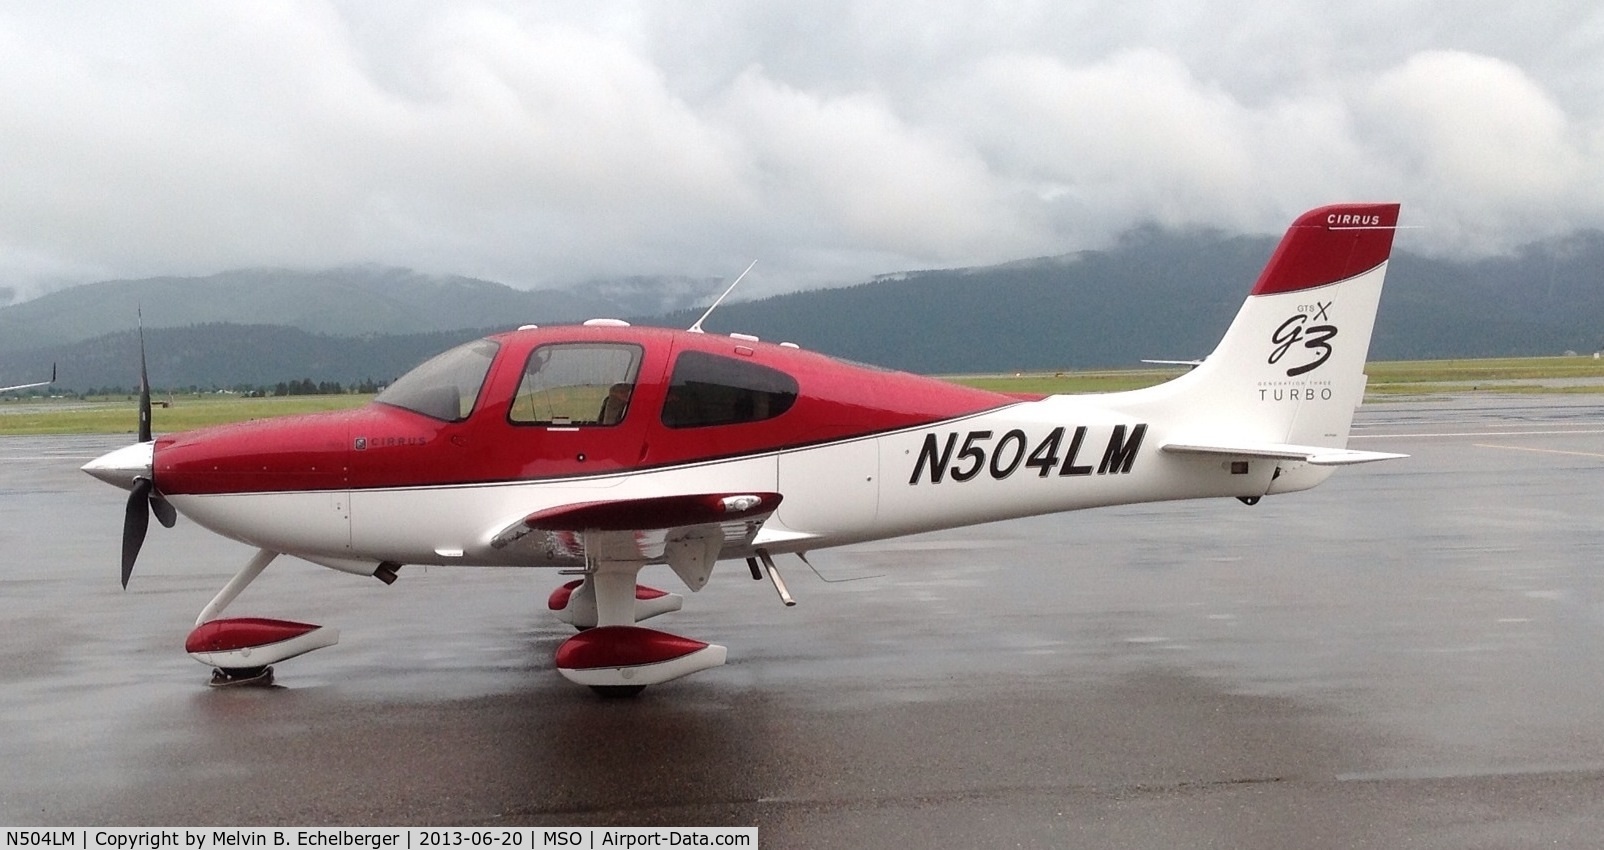 N504LM, 2008 Cirrus SR22 C/N 2912, Stopped in Missoula MT. To visit the Smoke Jumper Museum, and pick up old radios from them to transport to the Smoke Jumper museum in Cave Junction, OR.